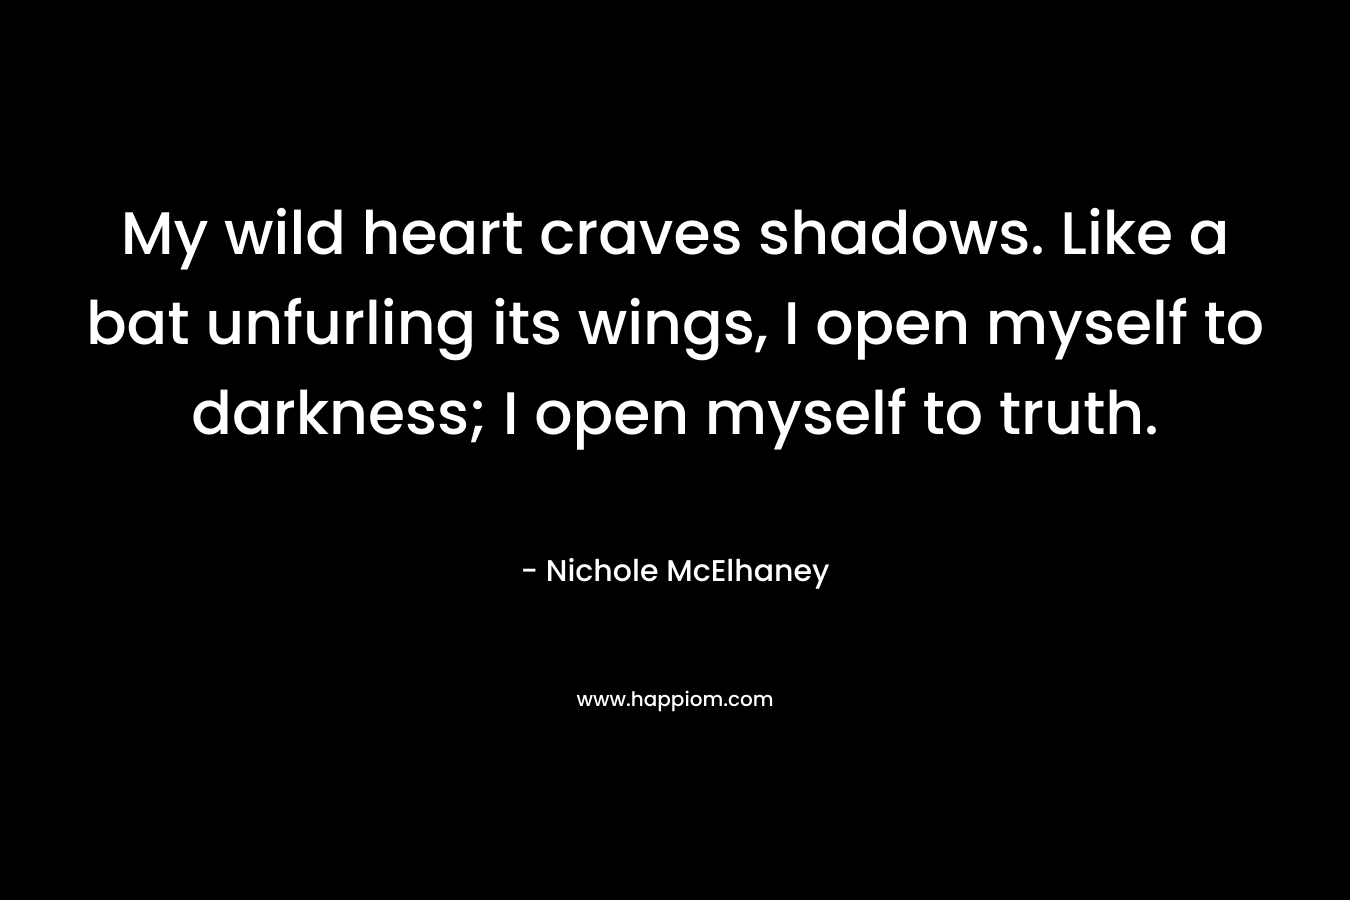 My wild heart craves shadows. Like a bat unfurling its wings, I open myself to darkness; I open myself to truth. – Nichole McElhaney